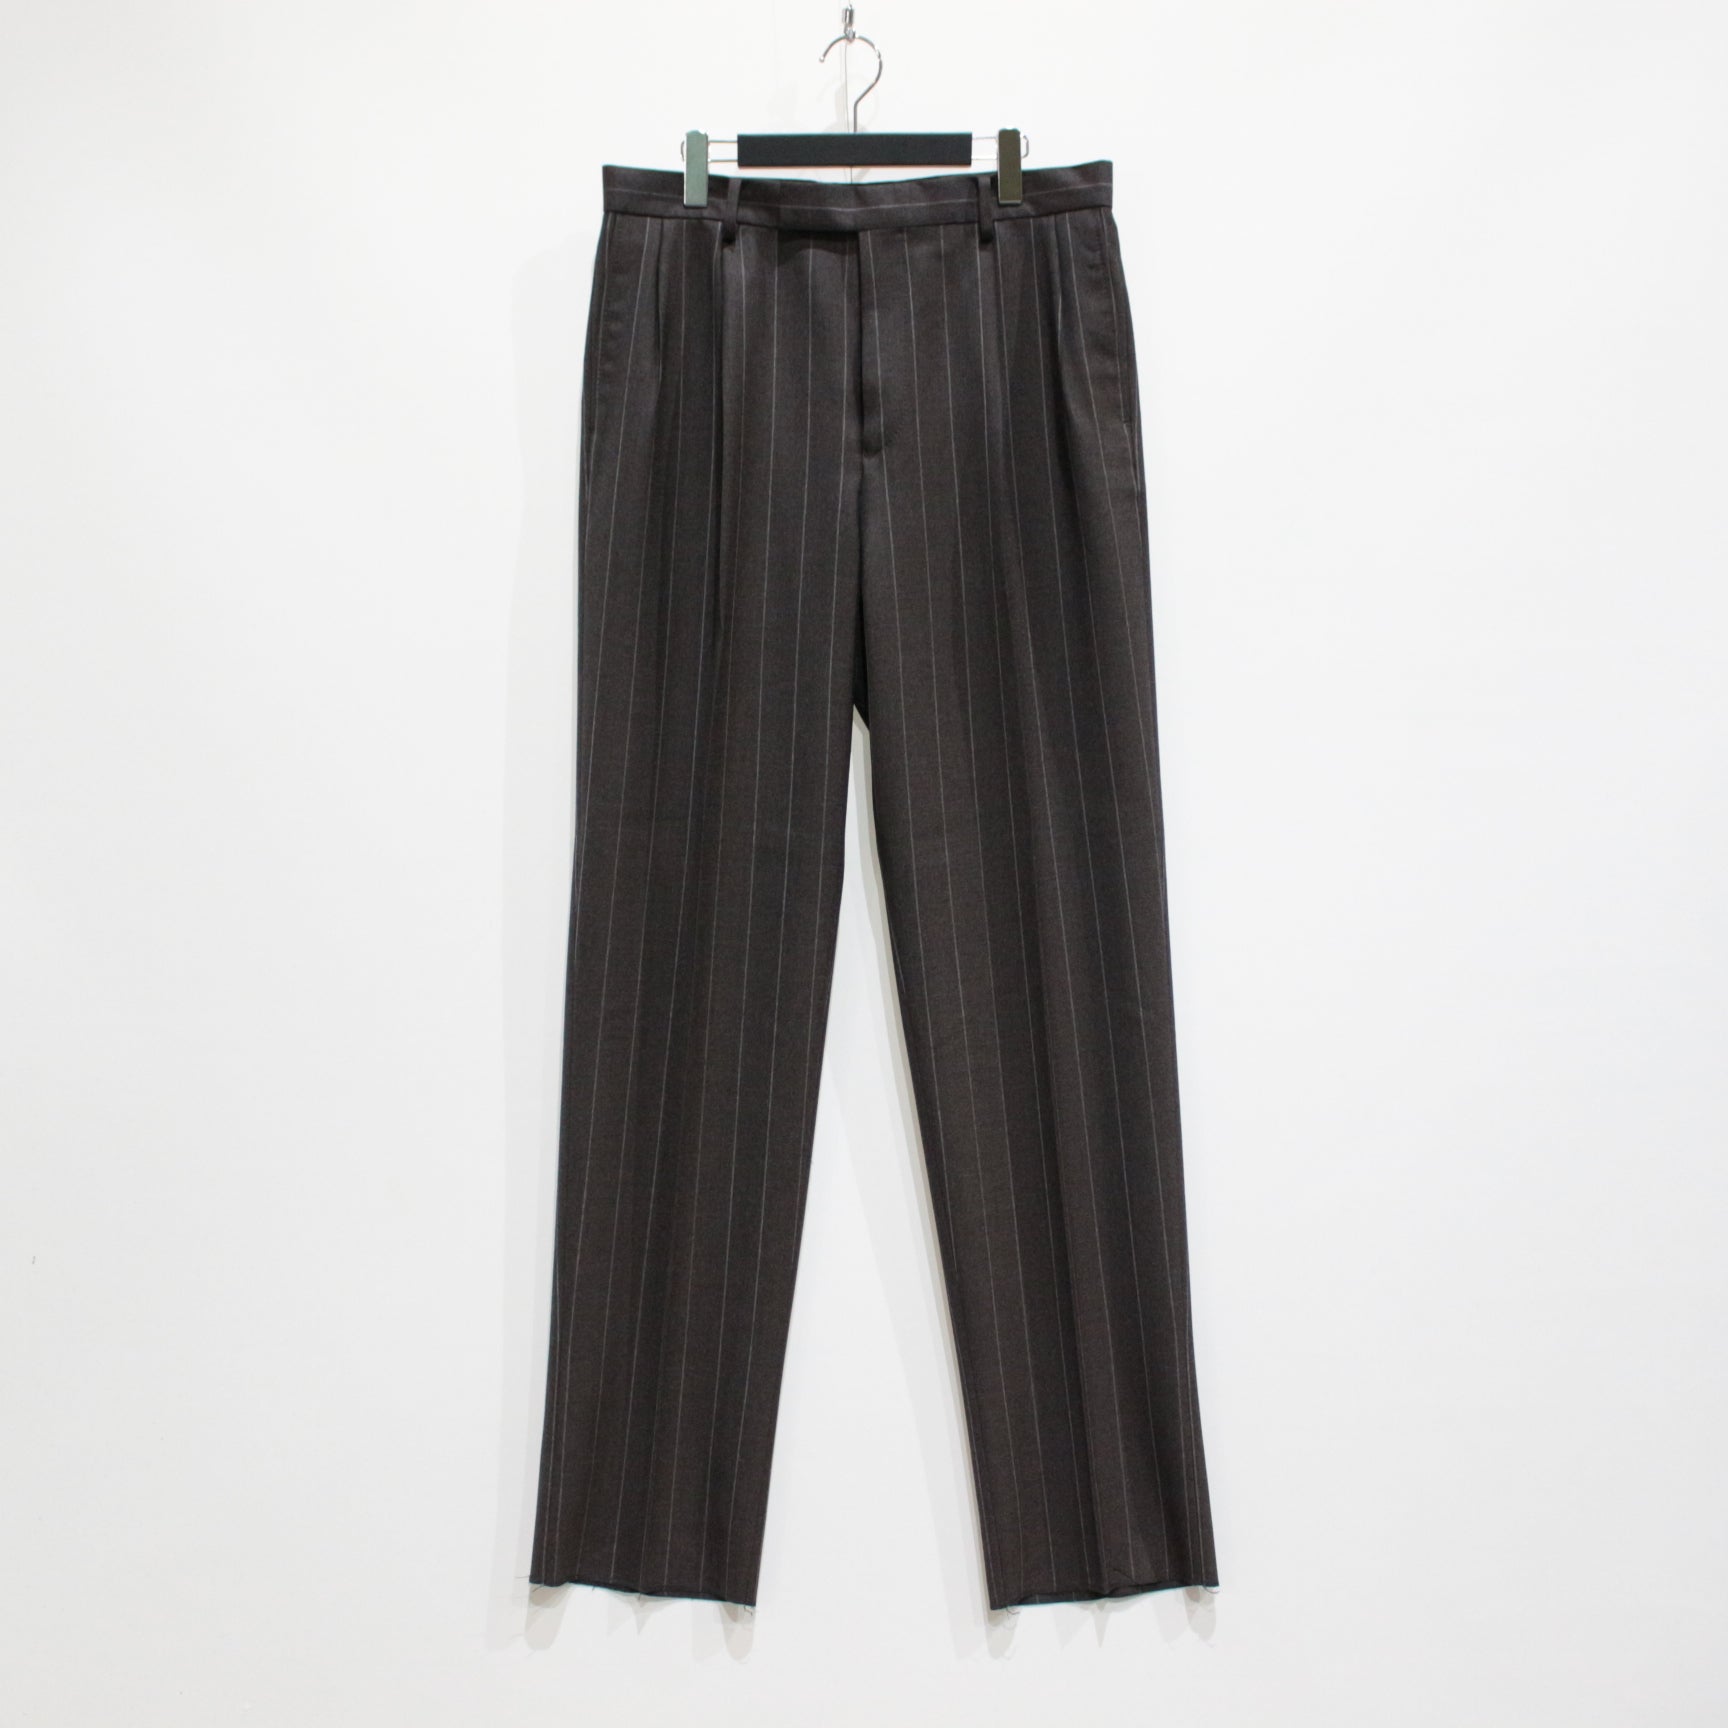 23ss DOUBLE PLEATED TROUSERS ブラックsサイズ - スラックス